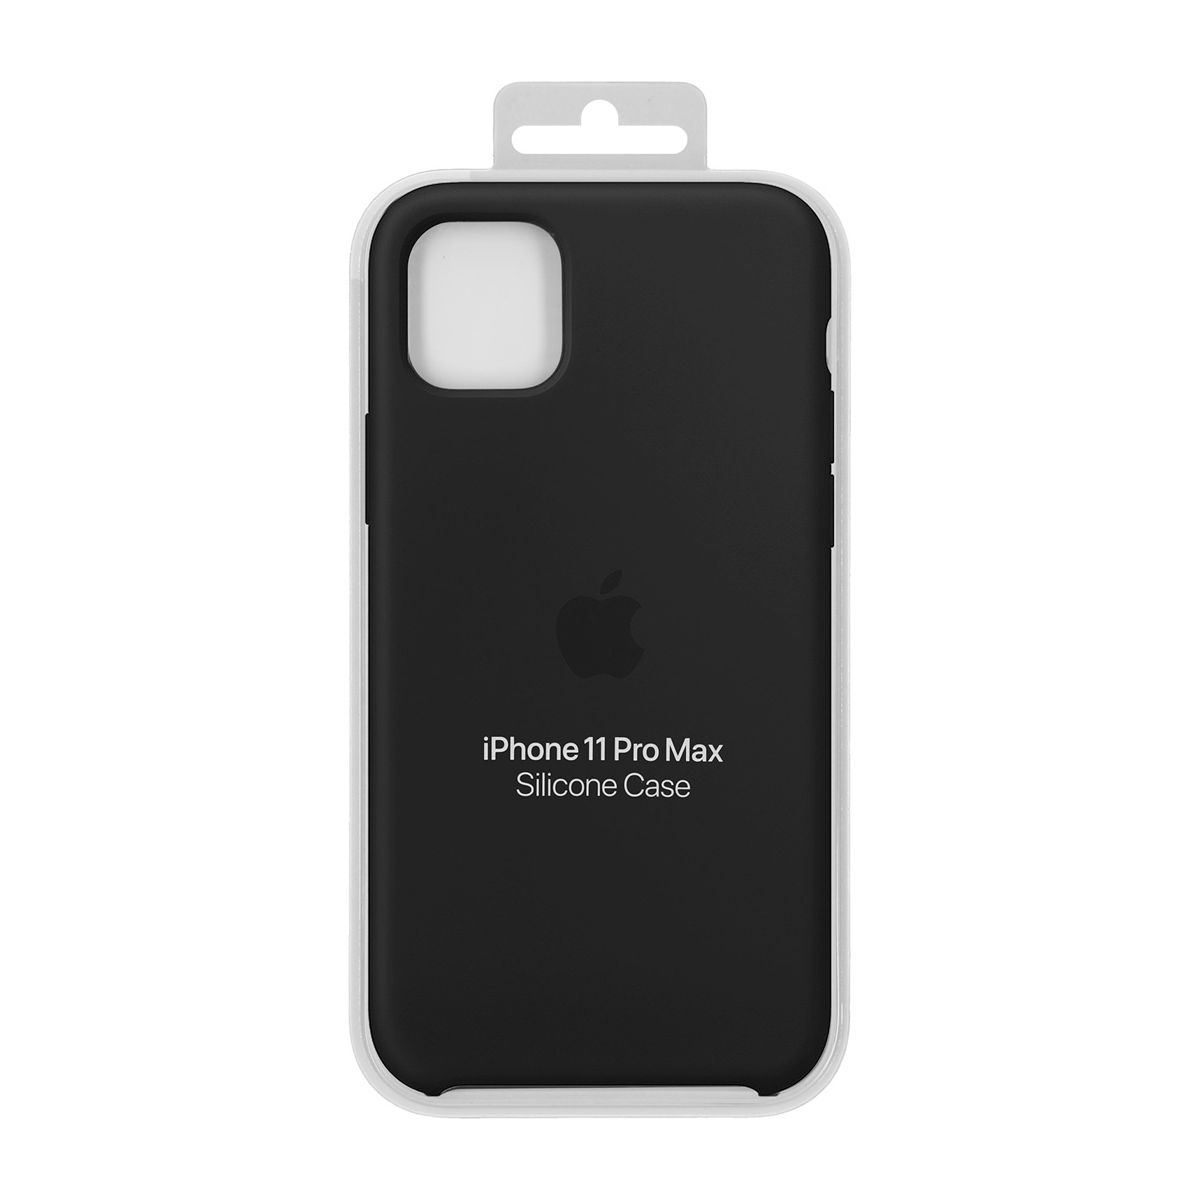 Apple Silicone Backcover for iPhone 11 Pro Max - Black